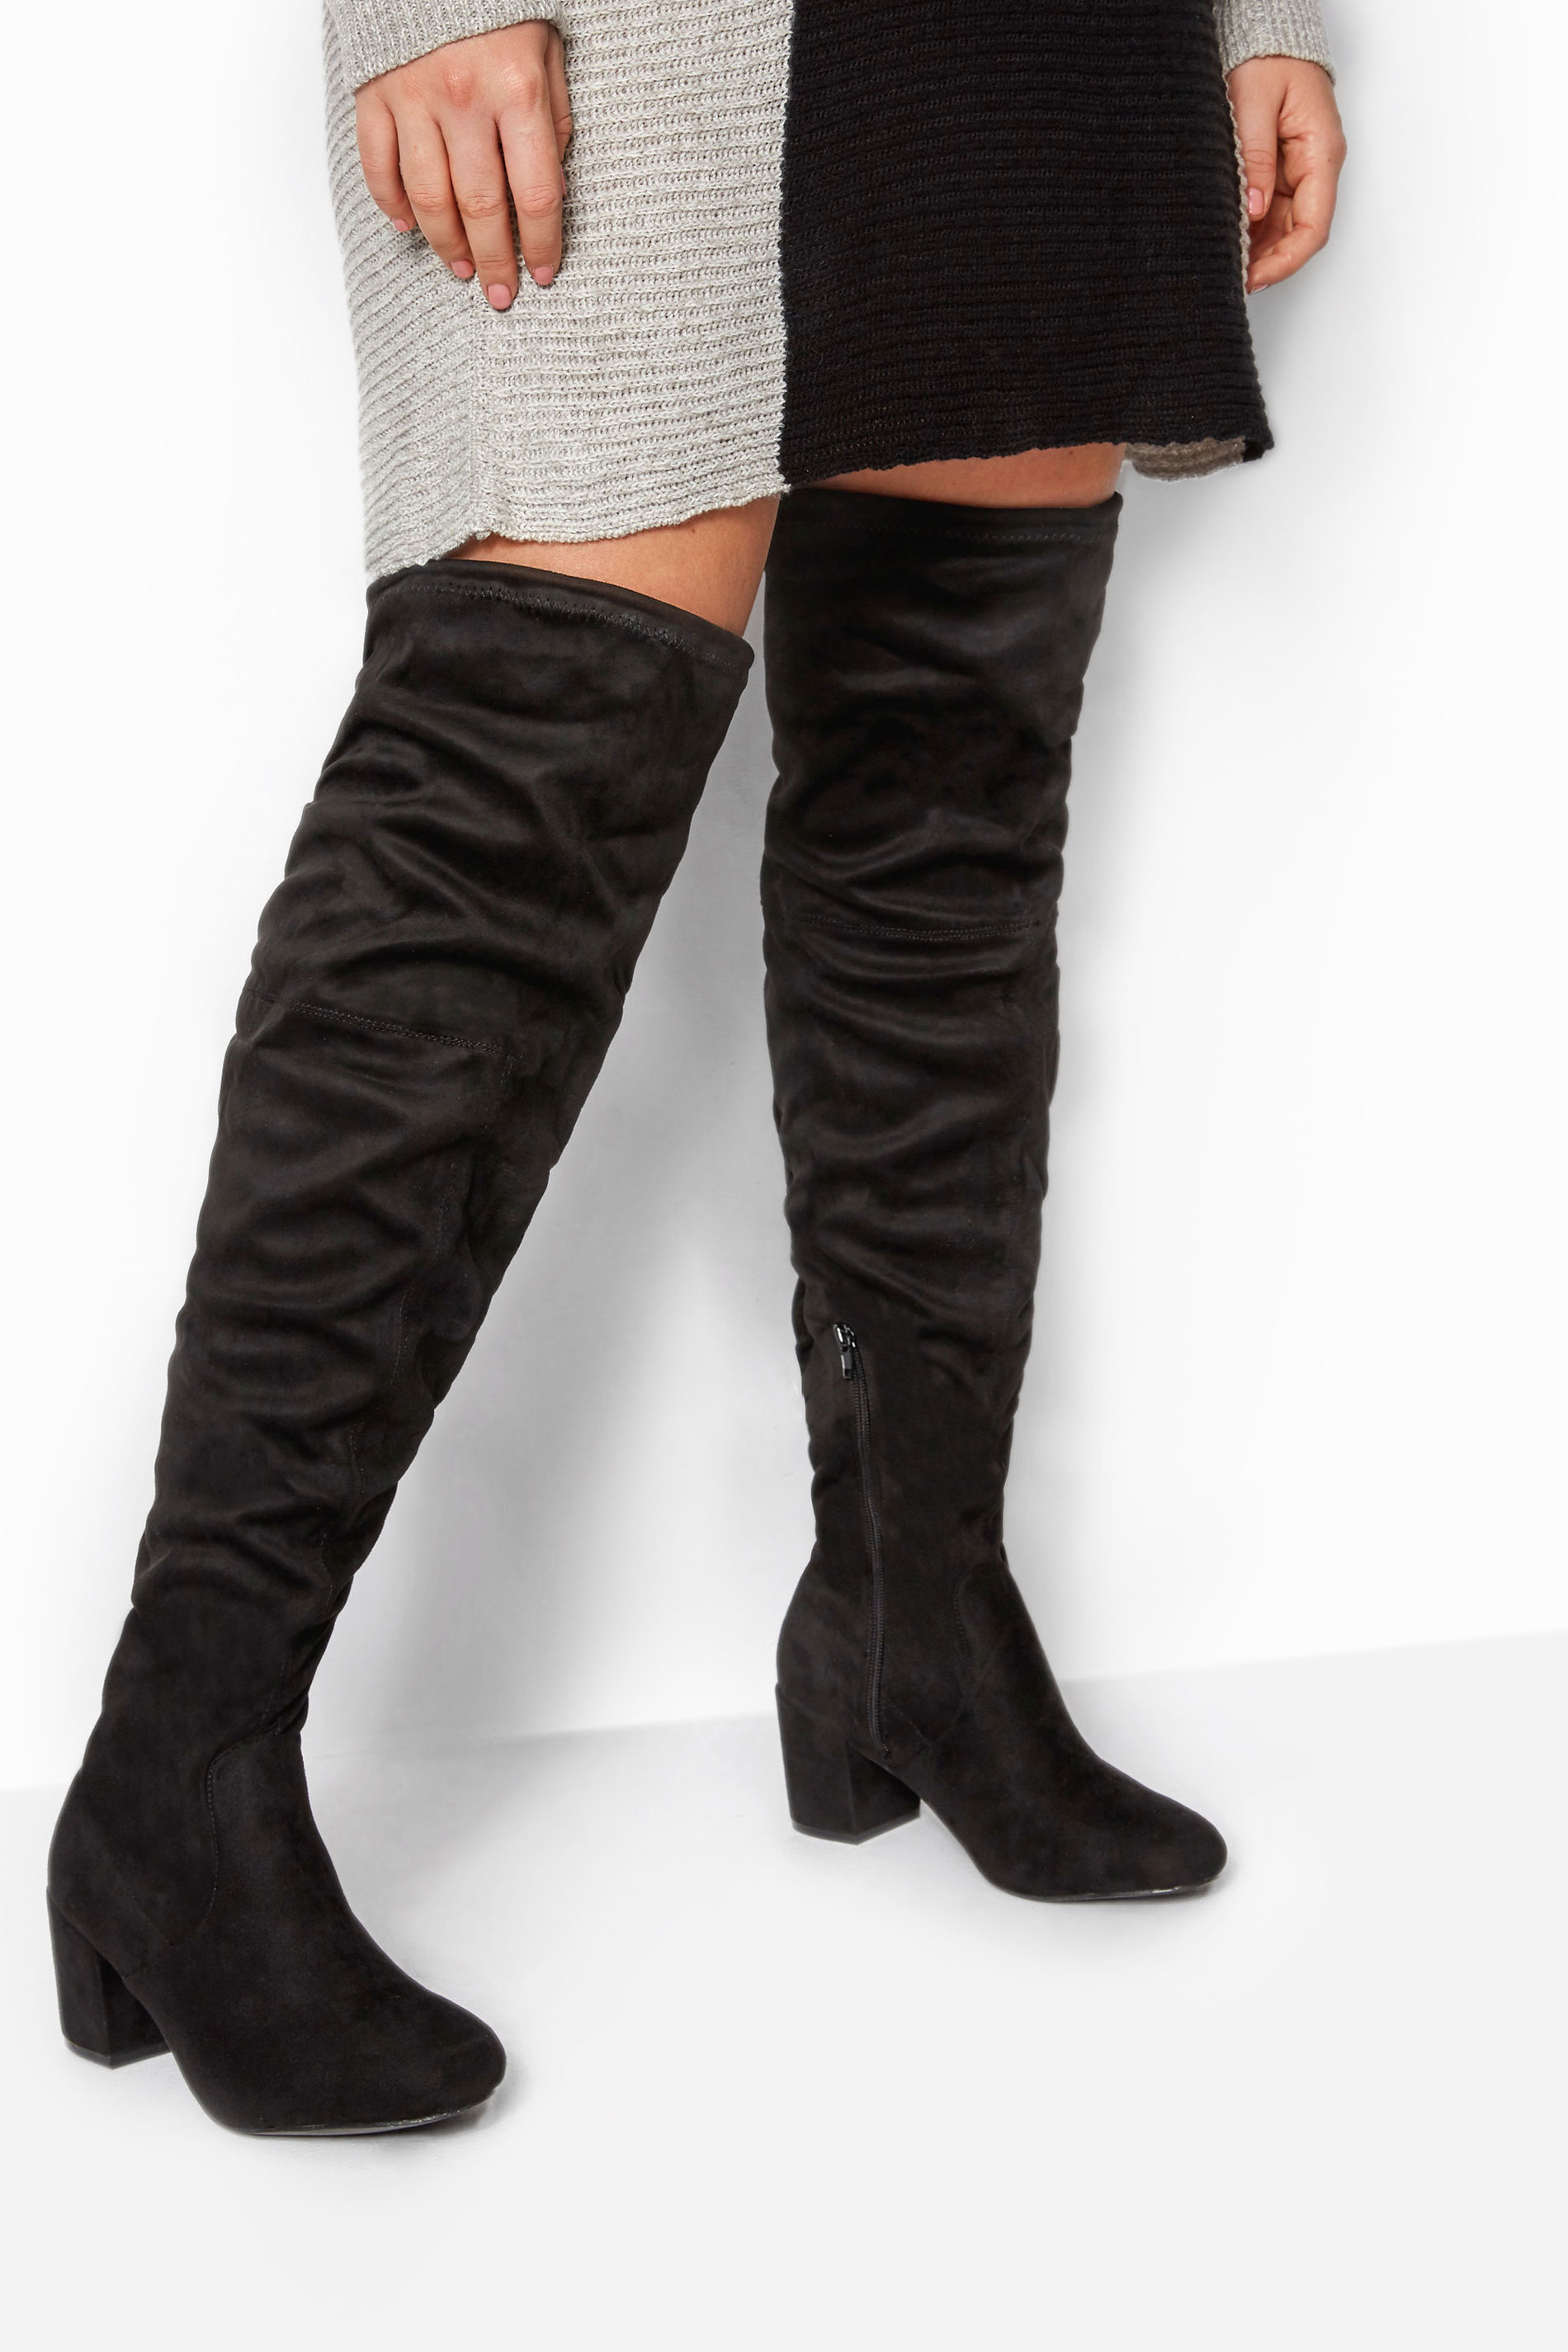 Black Faux Suede Over The Knee Boots In Wide E Fit & Extra Wide EEE Fit | Yours Clothing 1